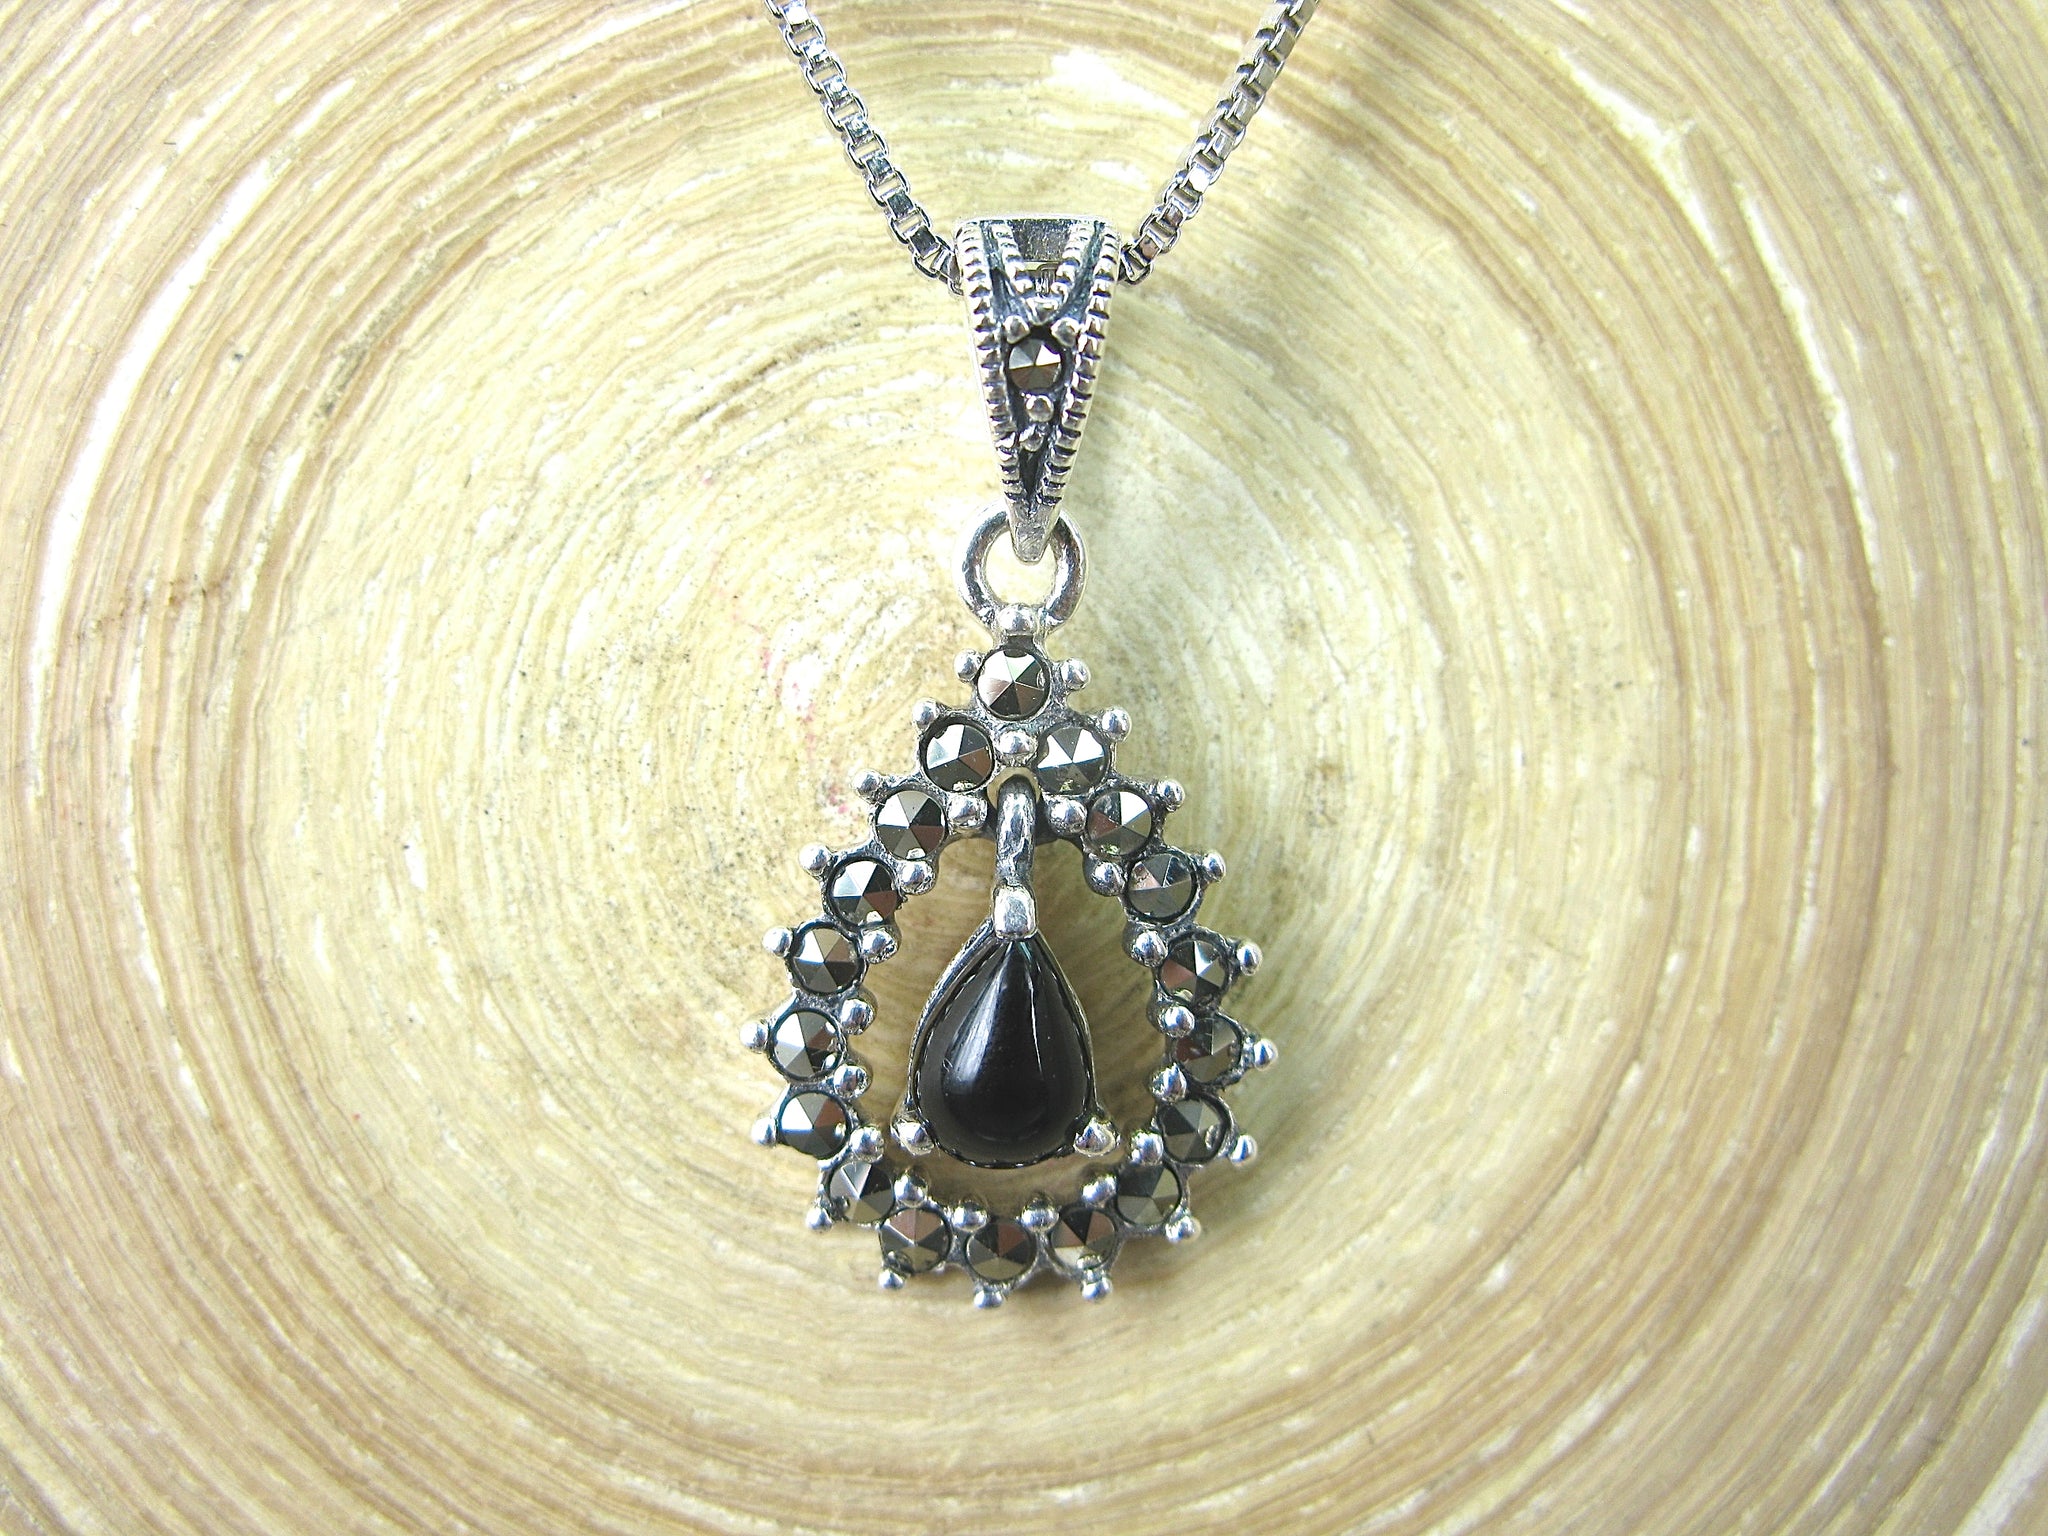 Water Drop Pear Shaped Onyx Marcasite 925 Sterling Silver Pendant